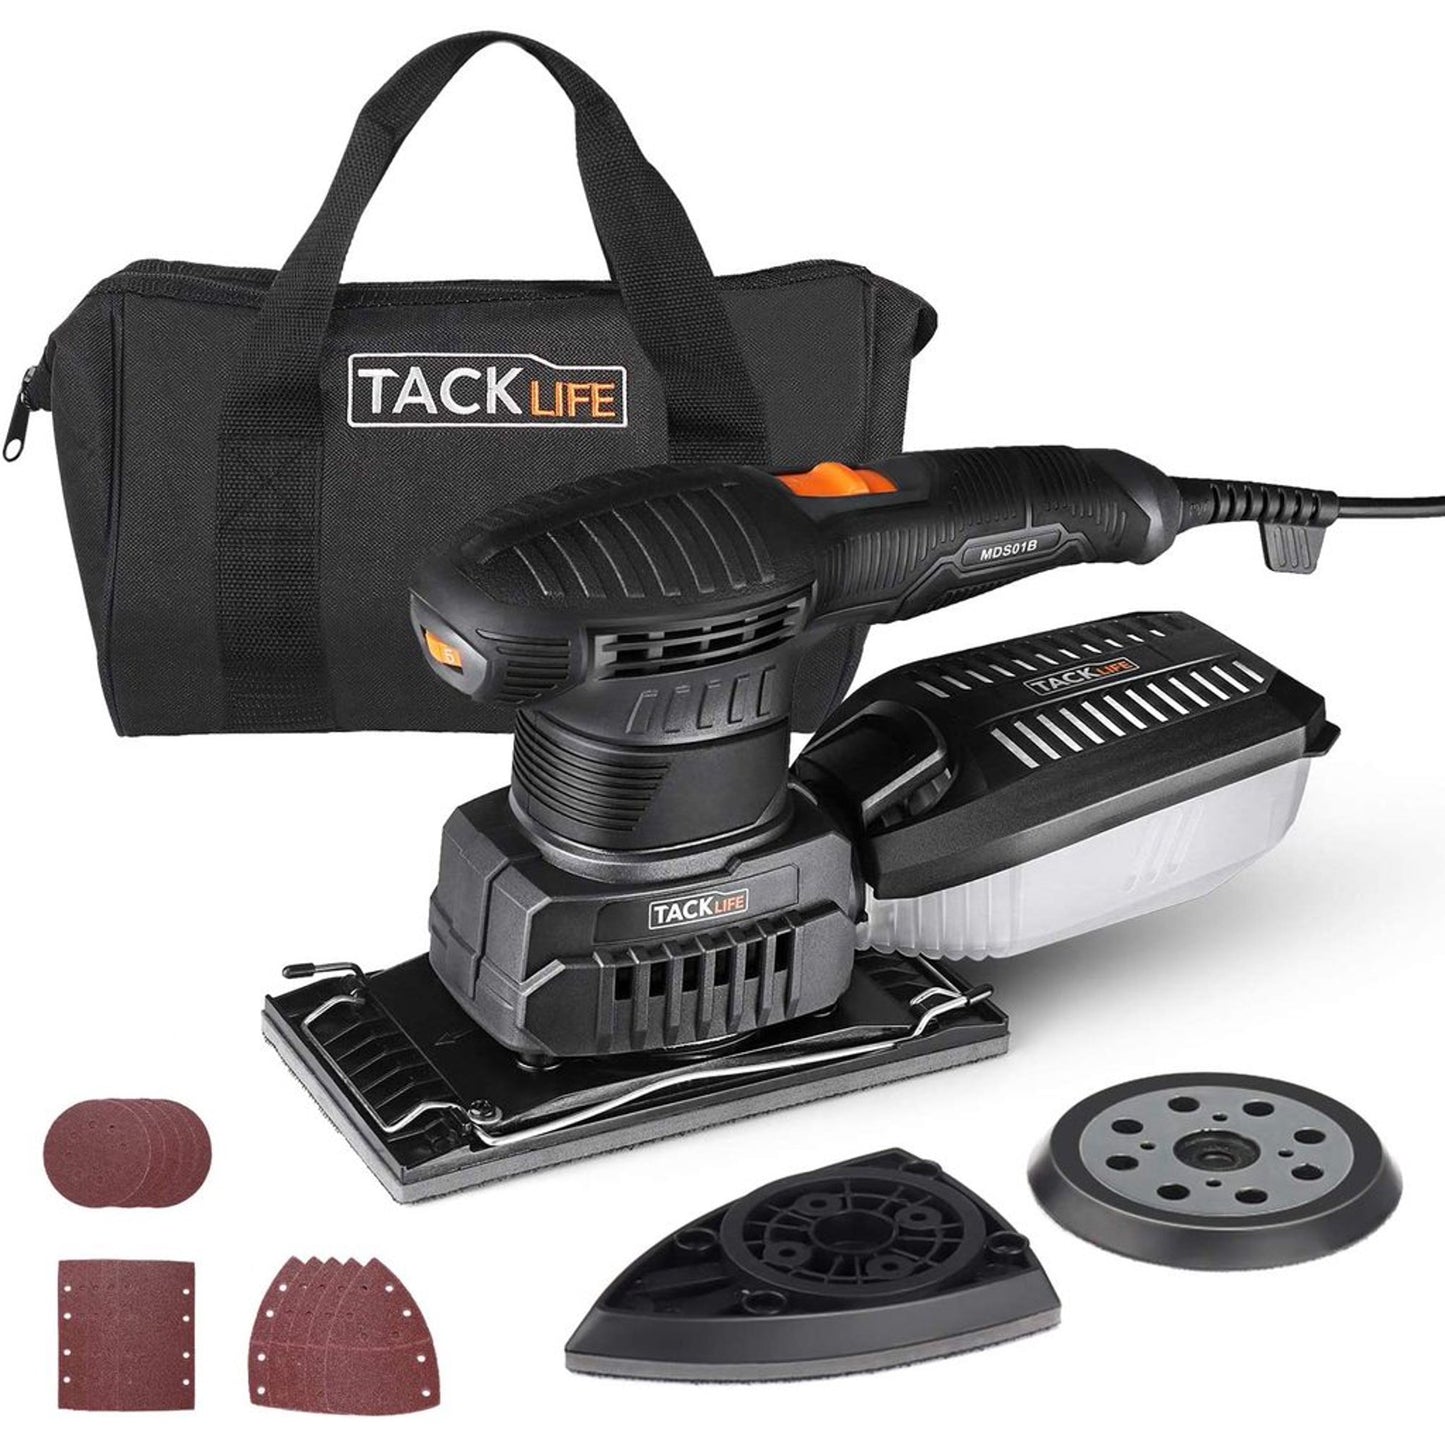 TACKLIFE 3 In 1 Multi-Function Electric Sander With 15 Pcs Sandpapers and 6 Variable Speeds, Efficient Dust Collection System For Woodworking - MDS01B